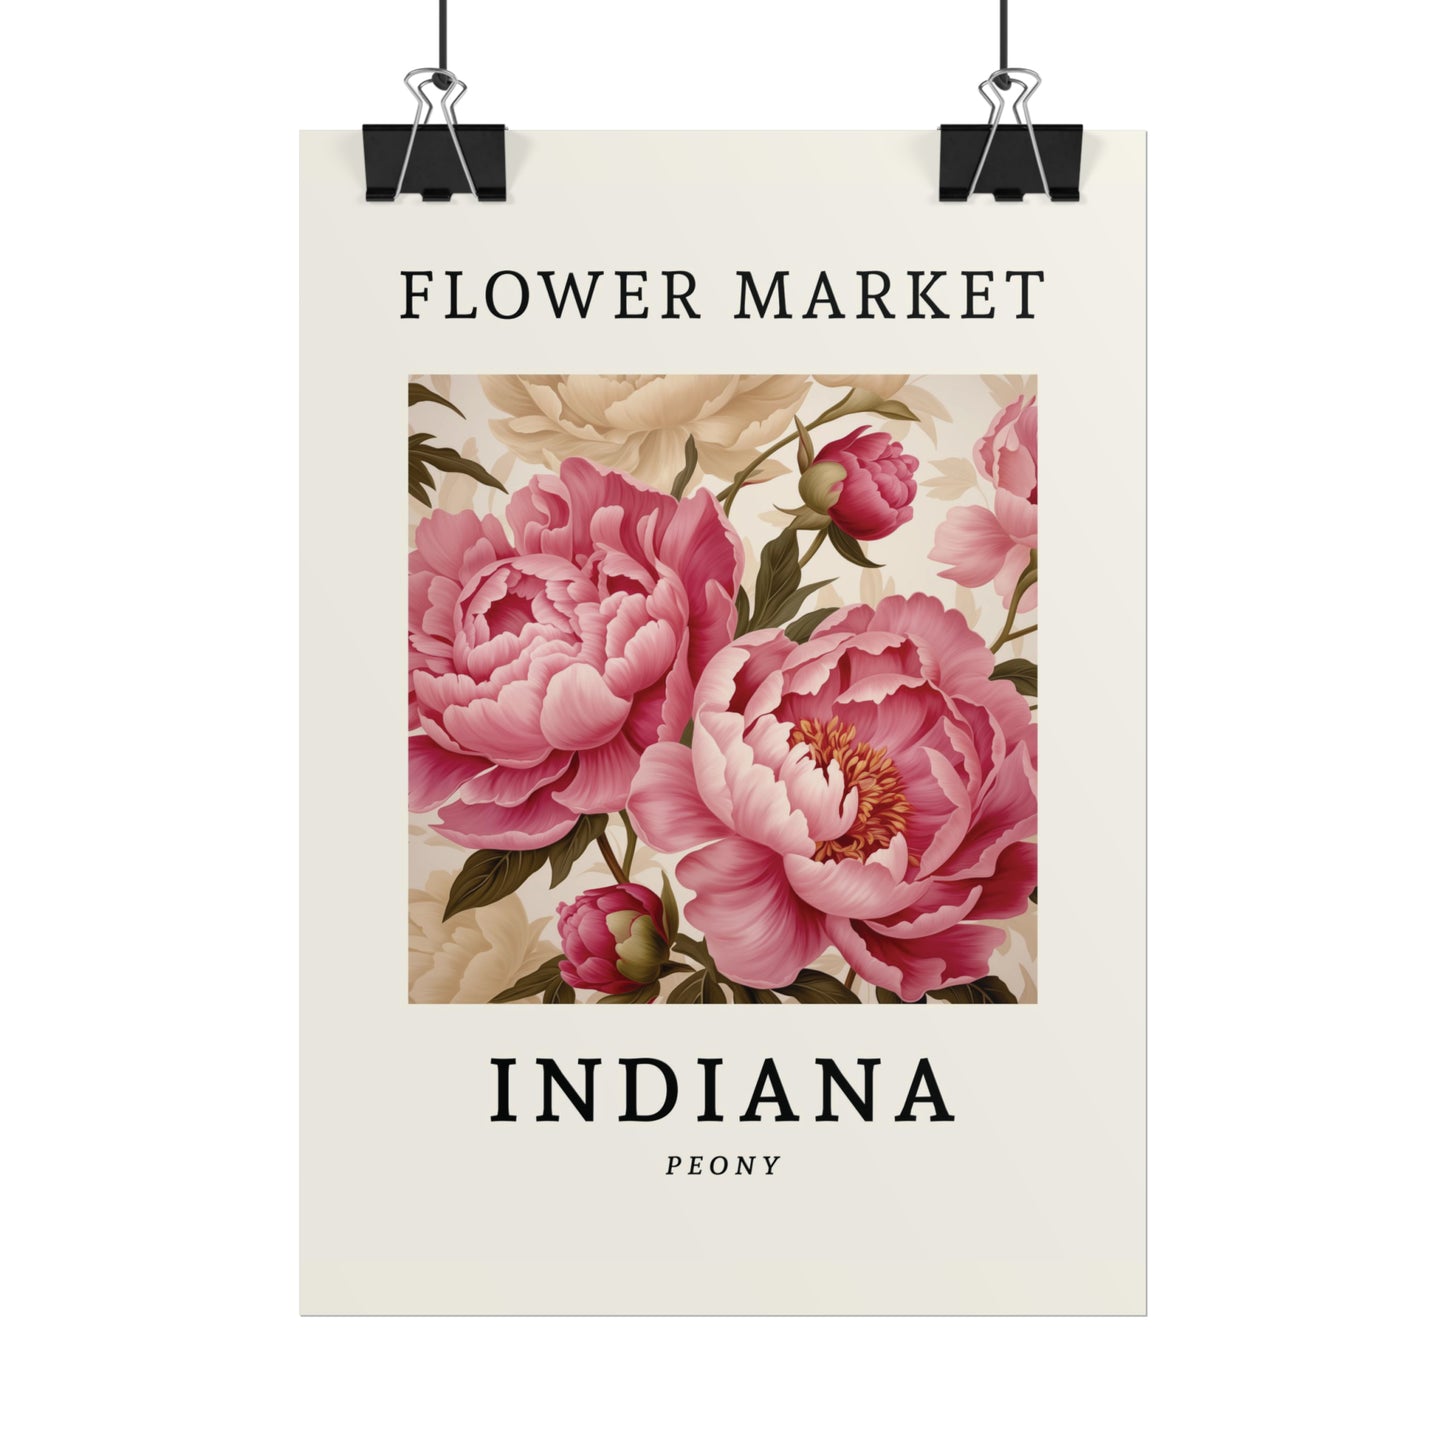 INDIANA FLOWER MARKET Poster Peony Floral Print